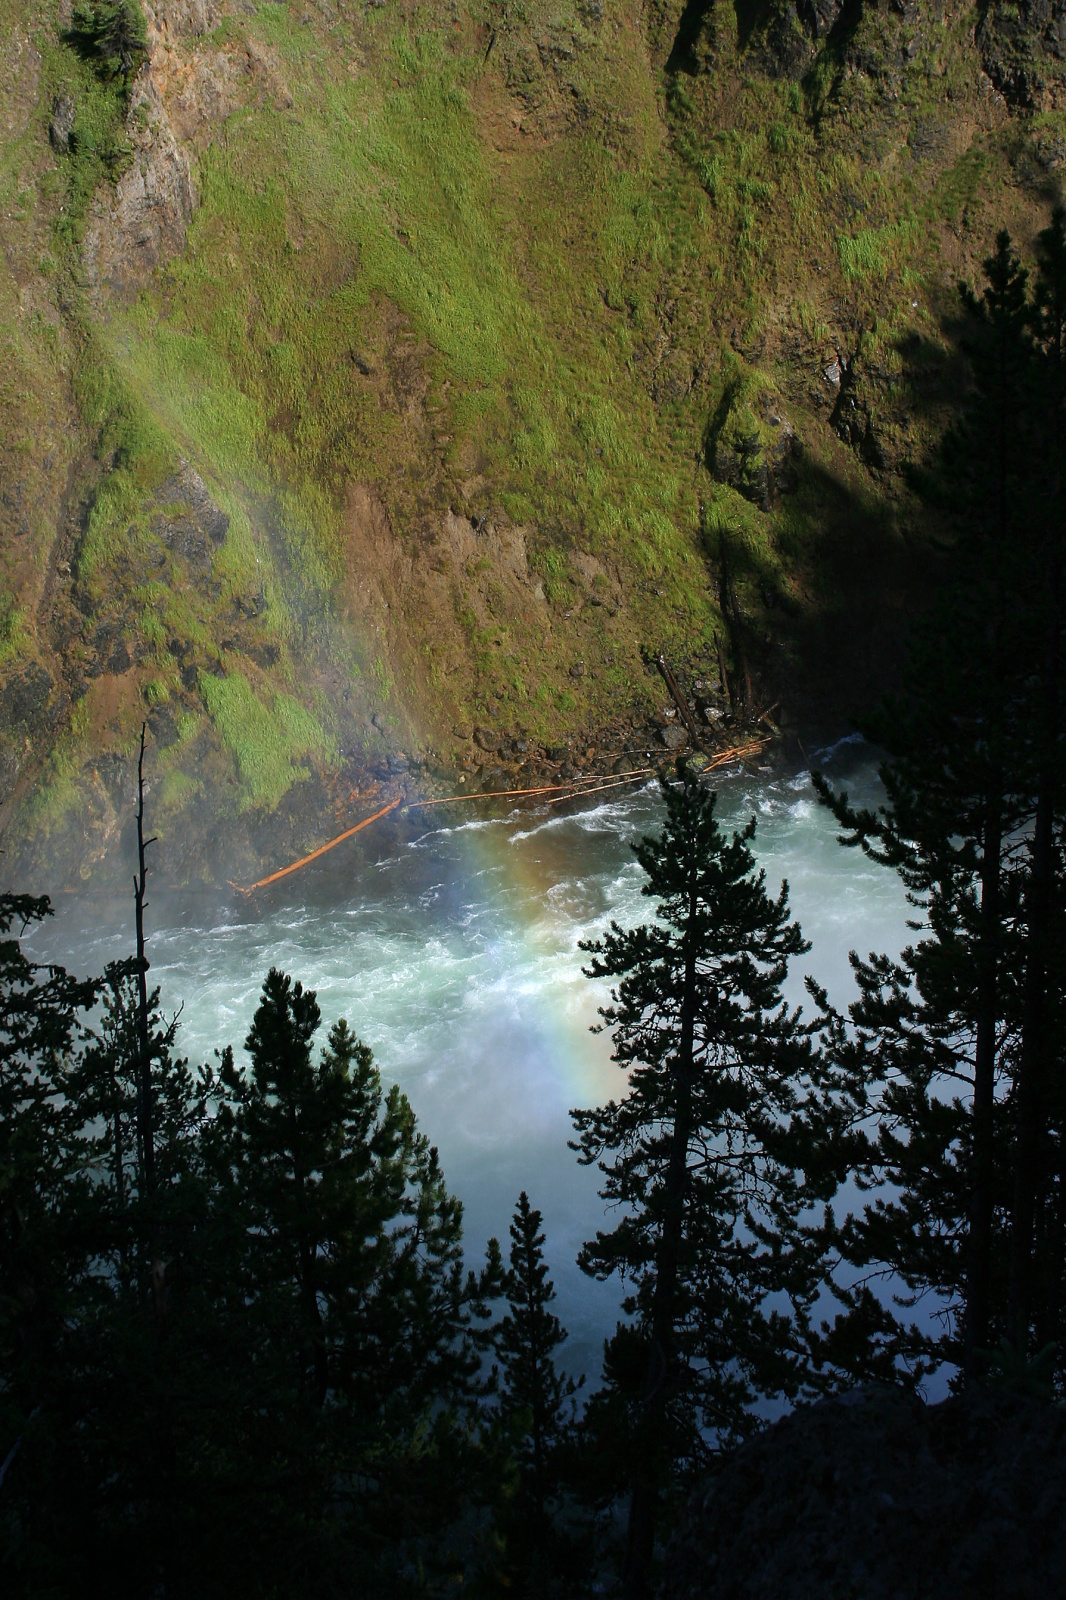 Upper Falls (Travels » US Trip 1: Cheyenne Country » The Journey » Yellowstone National Park » Waterfalls)